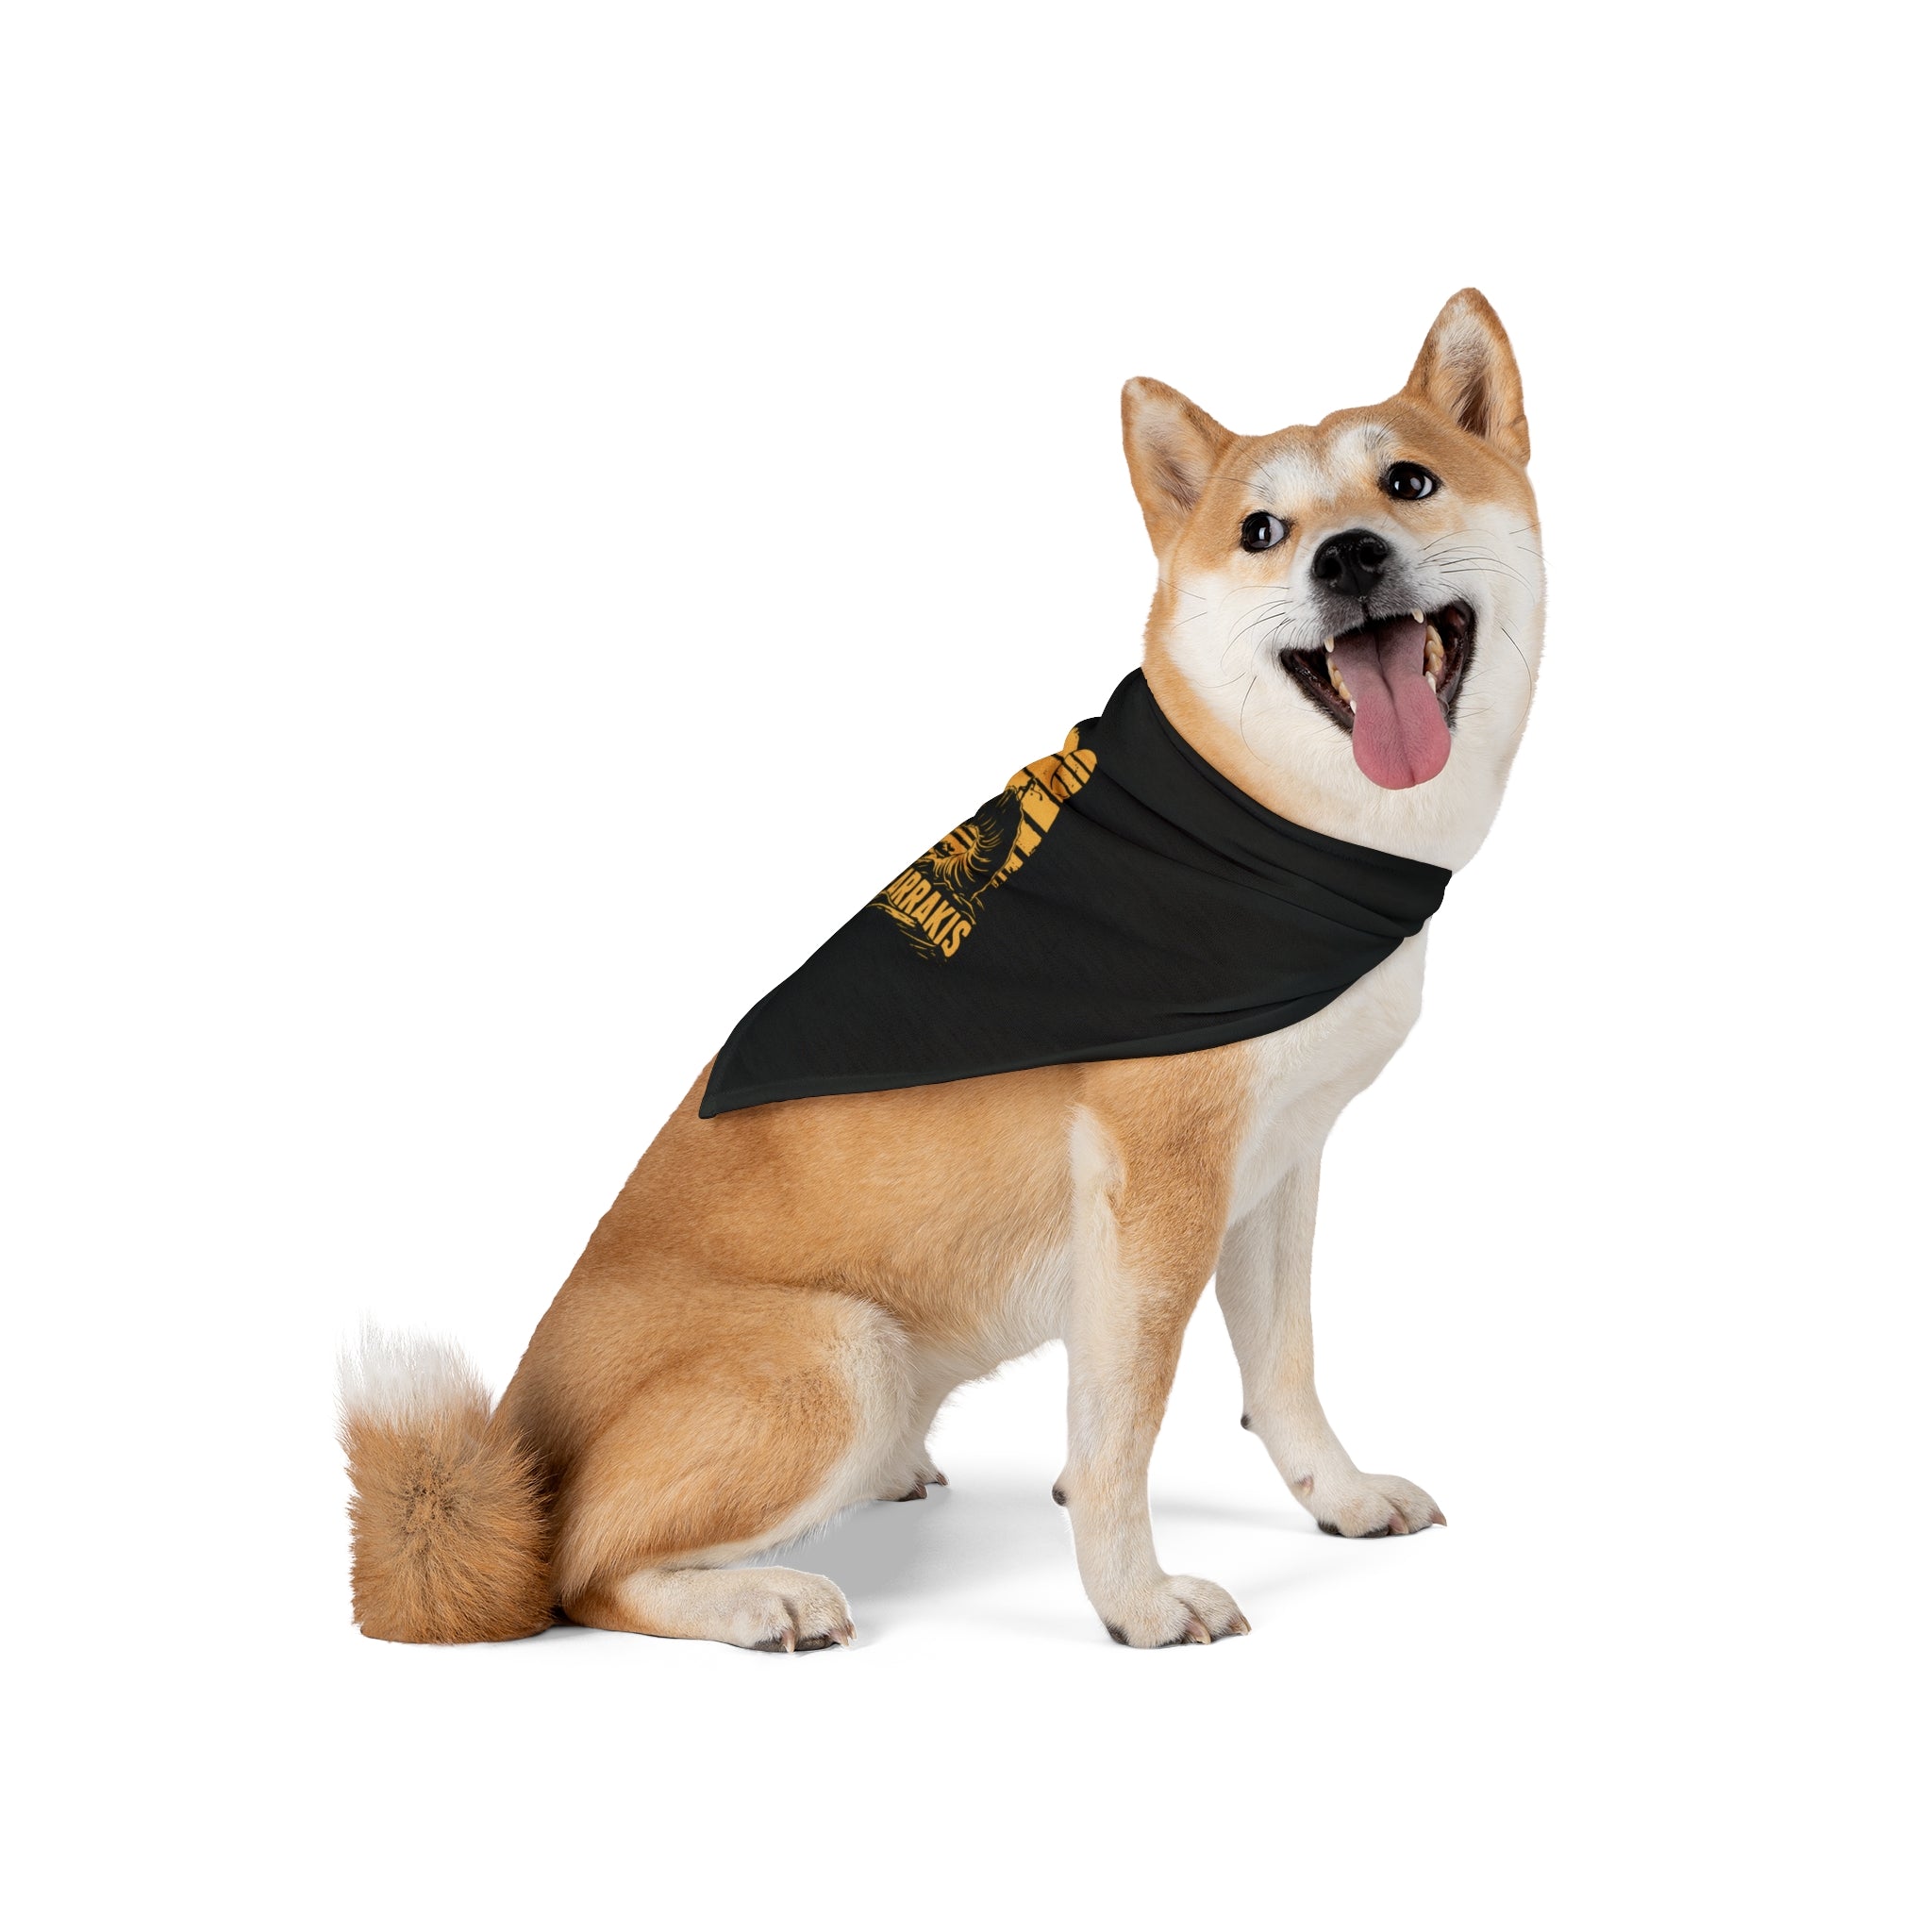 A Shiba Inu dog sits with its mouth open and tongue out, sporting a Surf Arrakis - Pet Bandana made of comfy polyester, with yellow lettering against a white background.